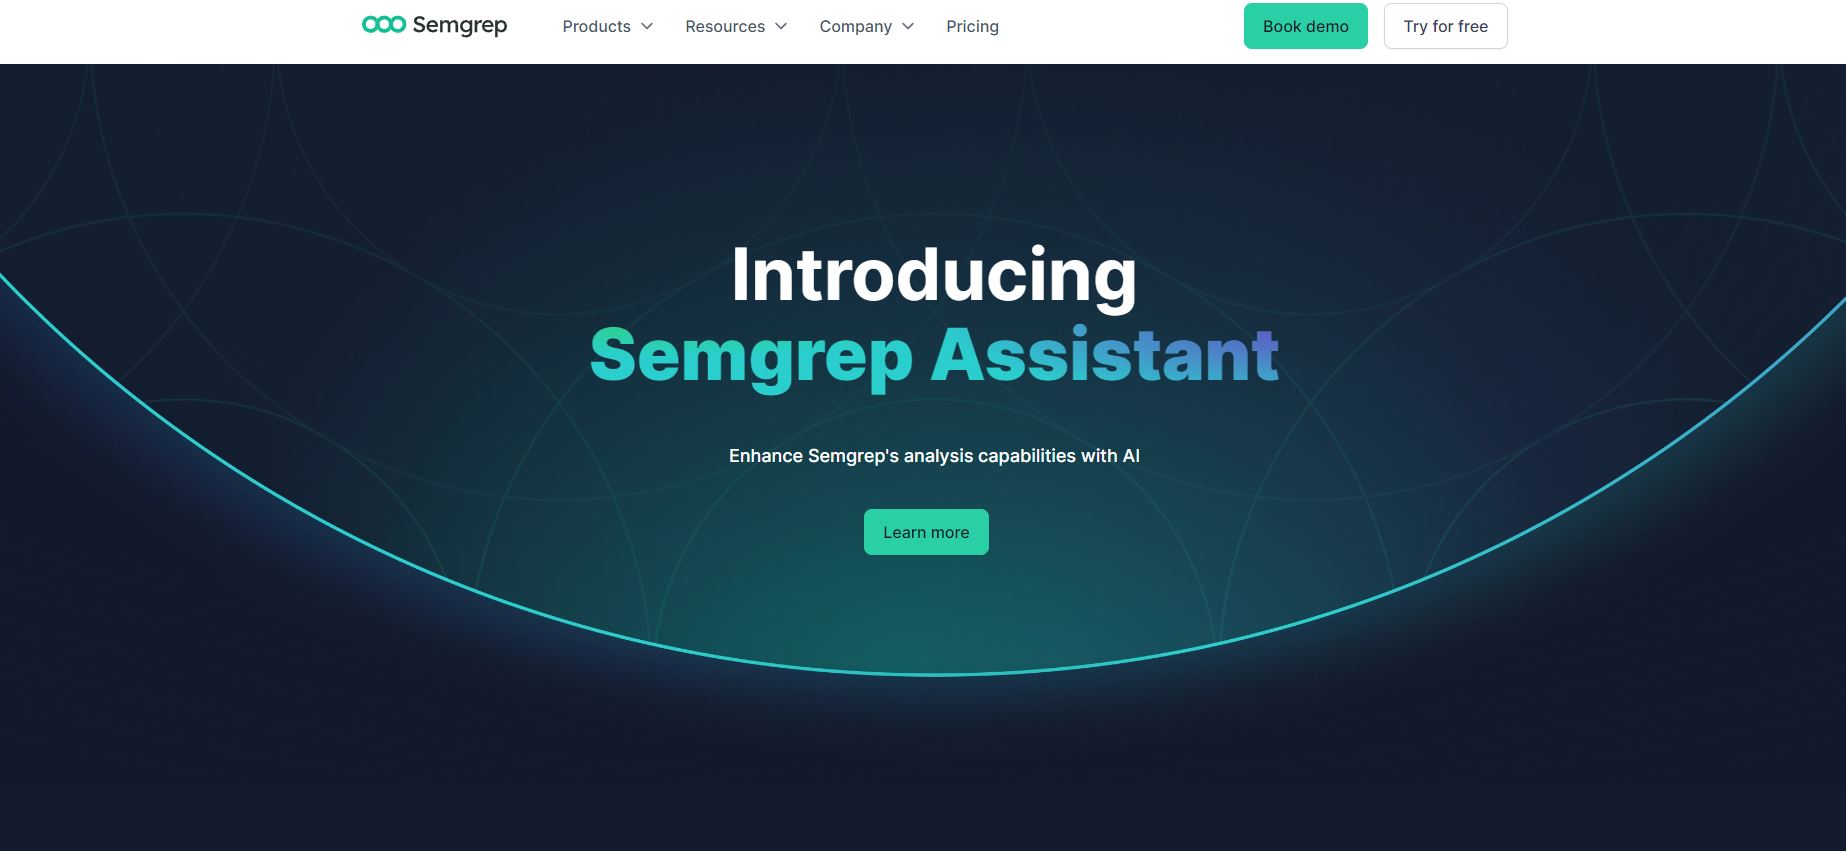 with $53M raised in a series C funding round, Semgrep is the answer for modern development workflows.